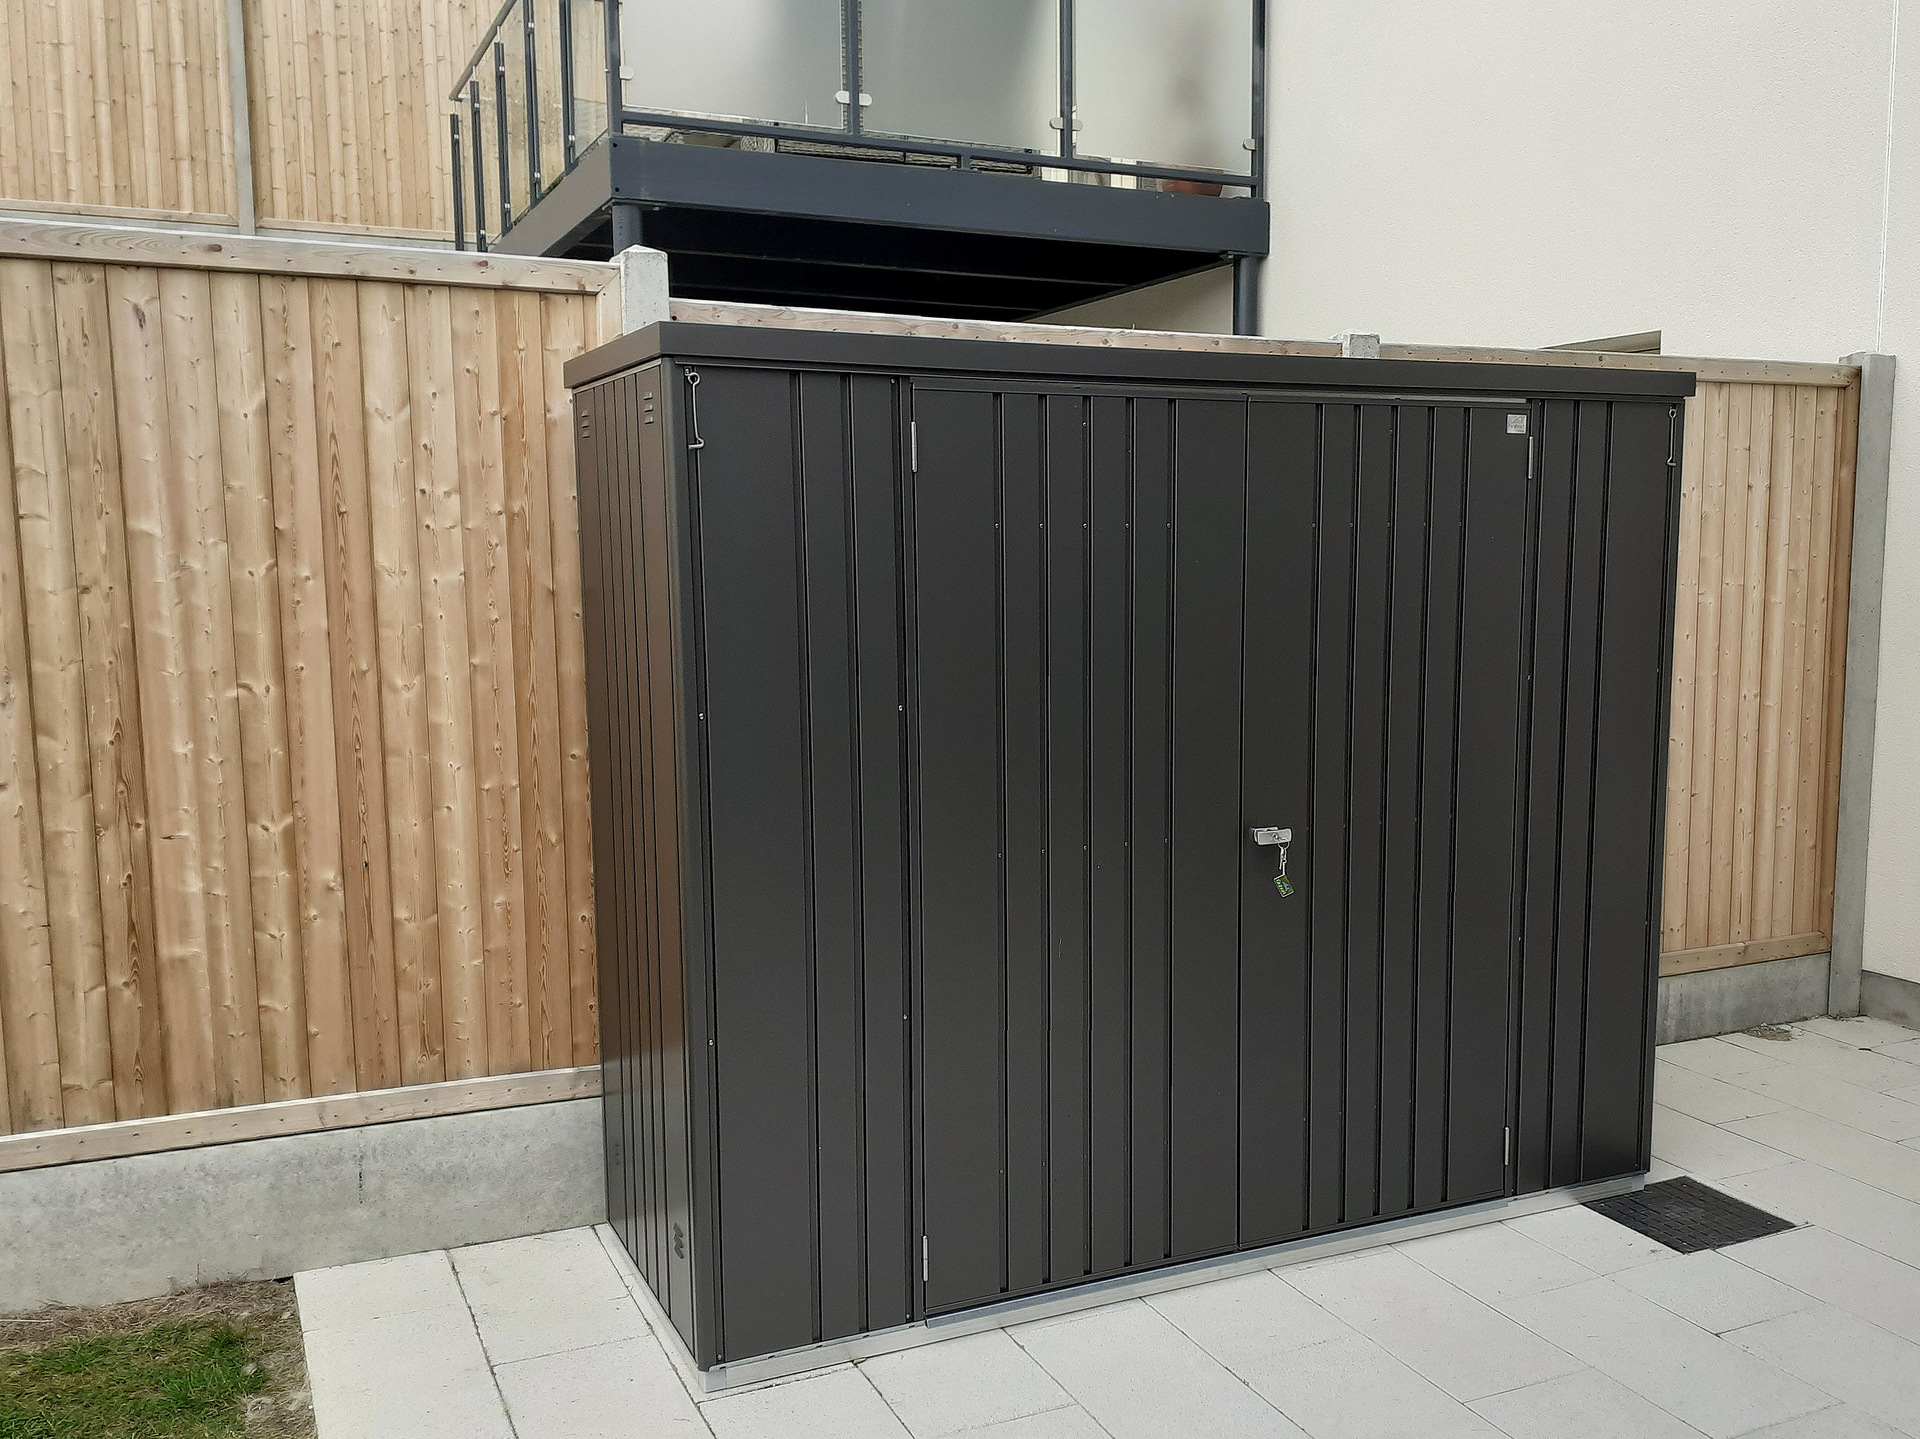 The superb quality and style of the Biohort Equipment Locker 230 in metallic dark grey  with optional accessories including aluminium floor frame  | supplied + installed in Naas, Co Kildare by Owen Chubb Landscapers. Tel 087-2306 128.